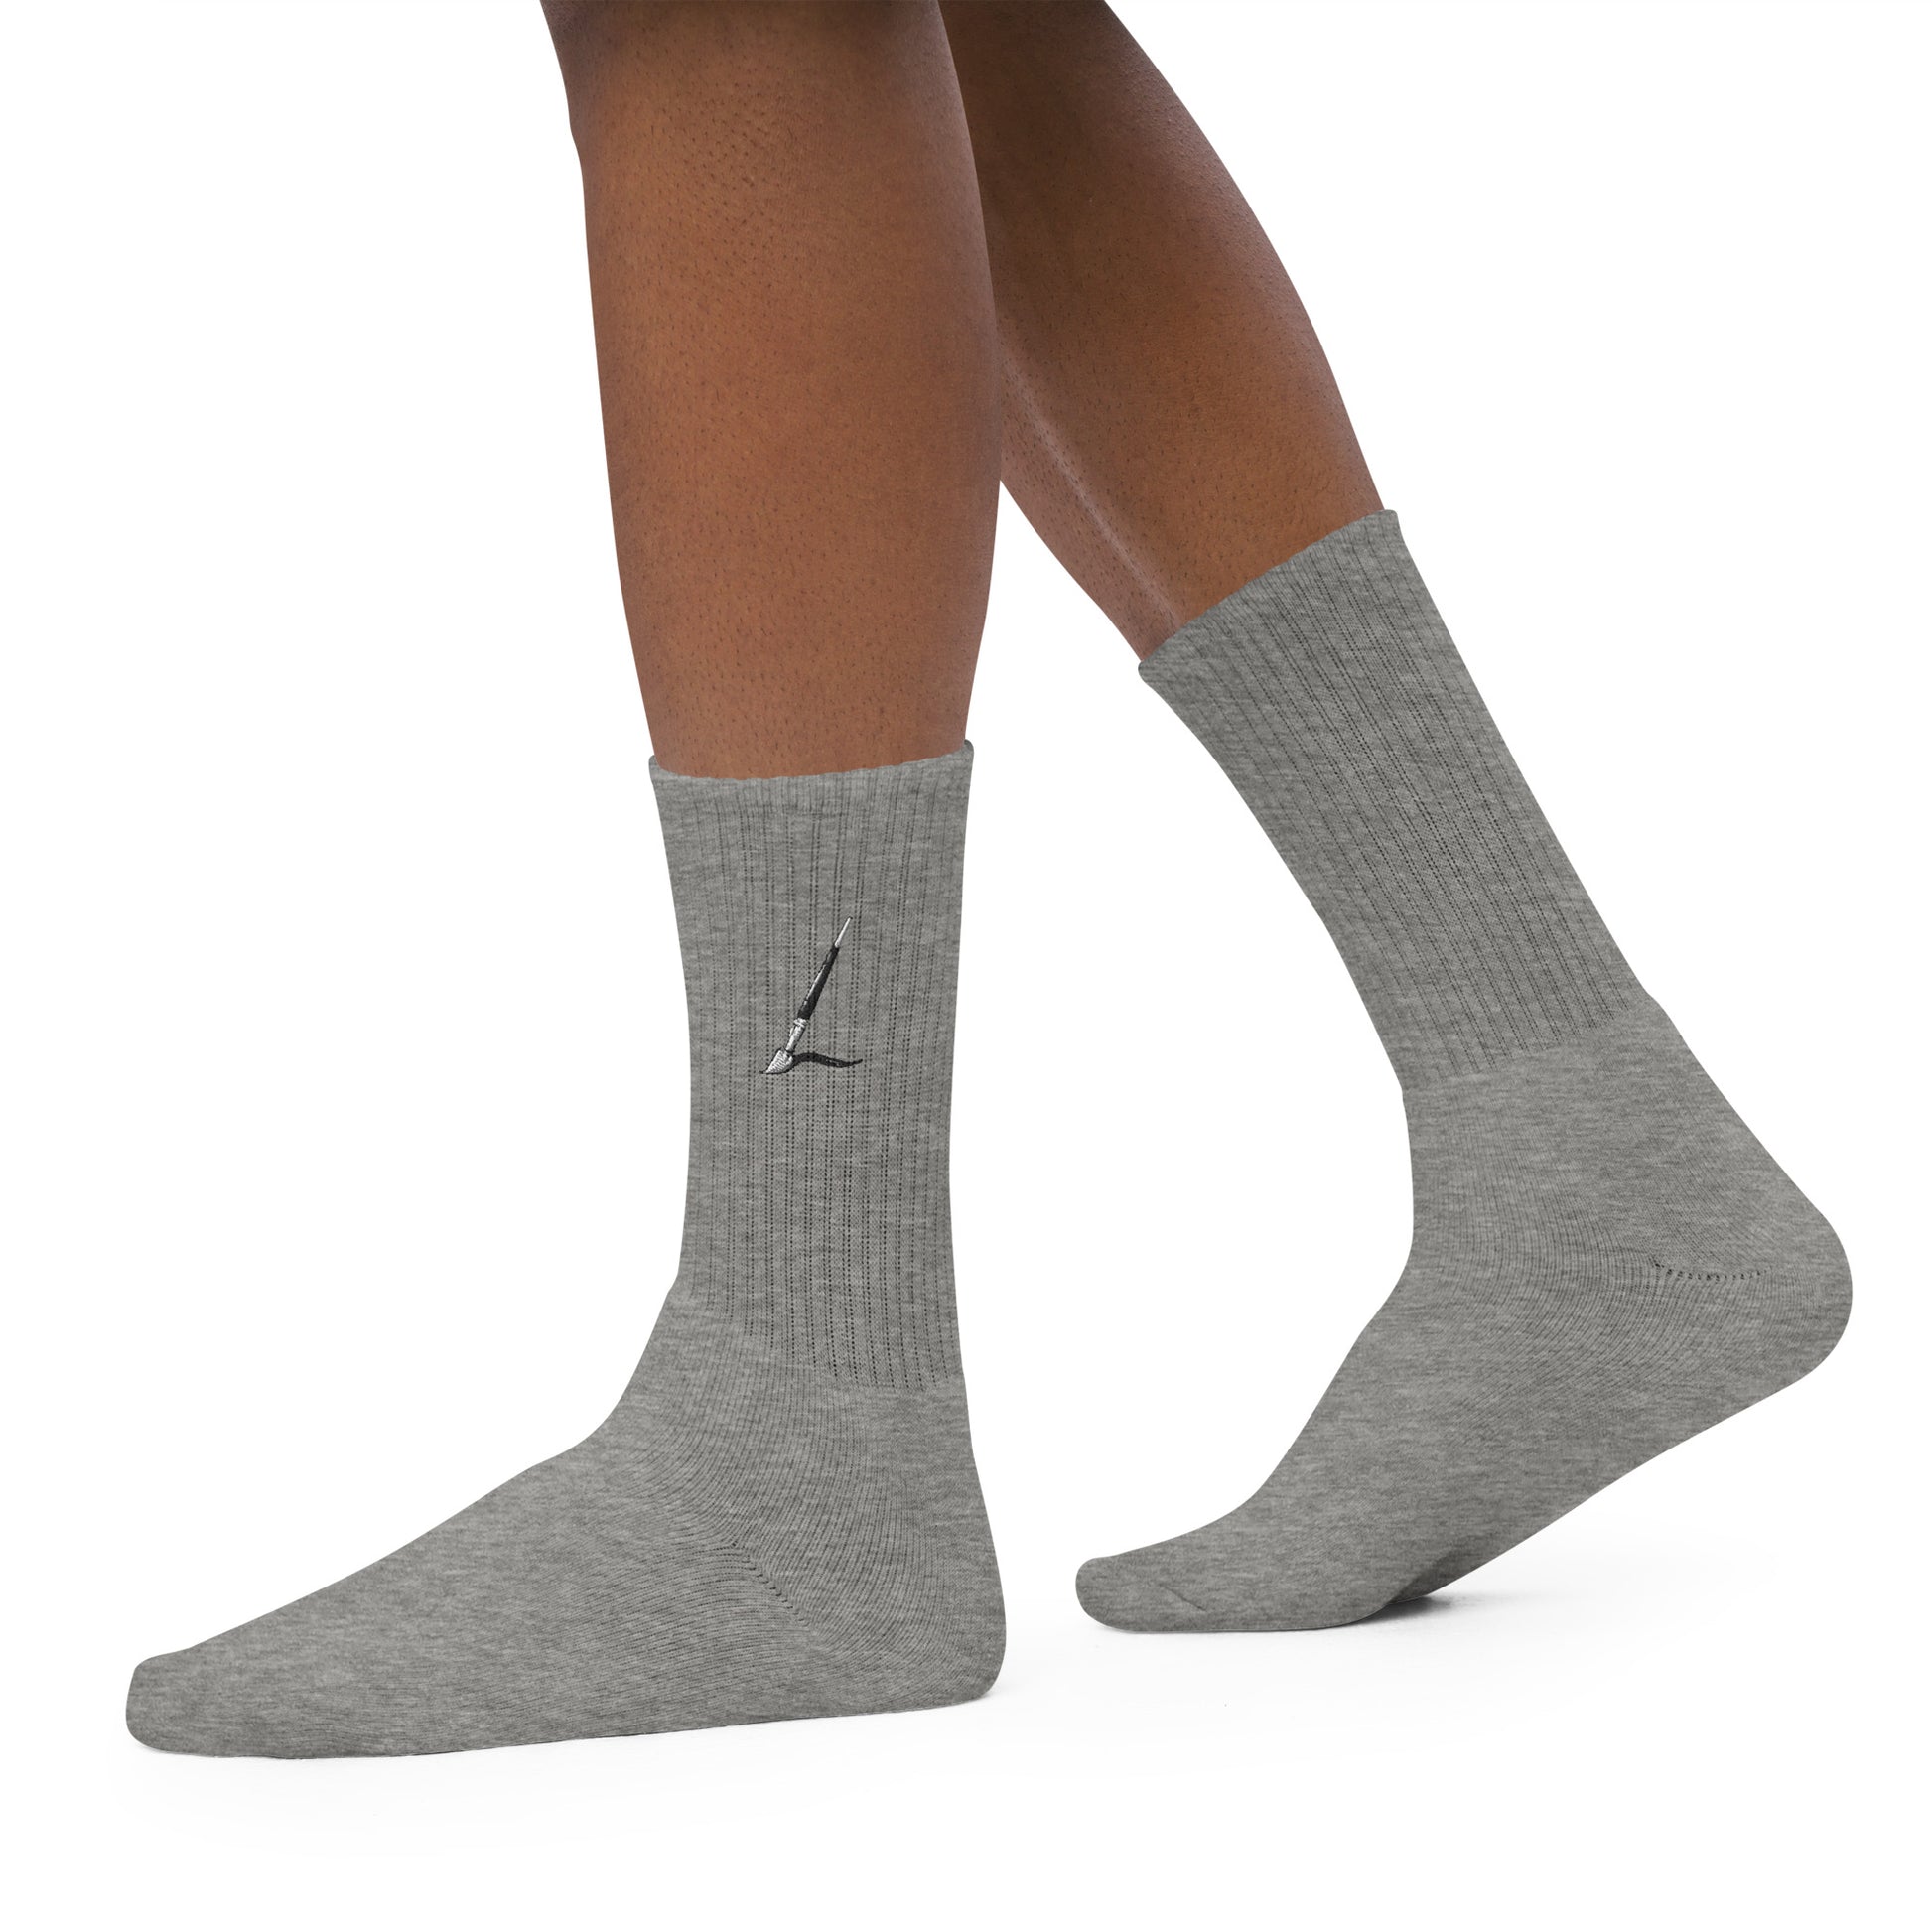 socks-from-the-side-with-paintbrush-symbol